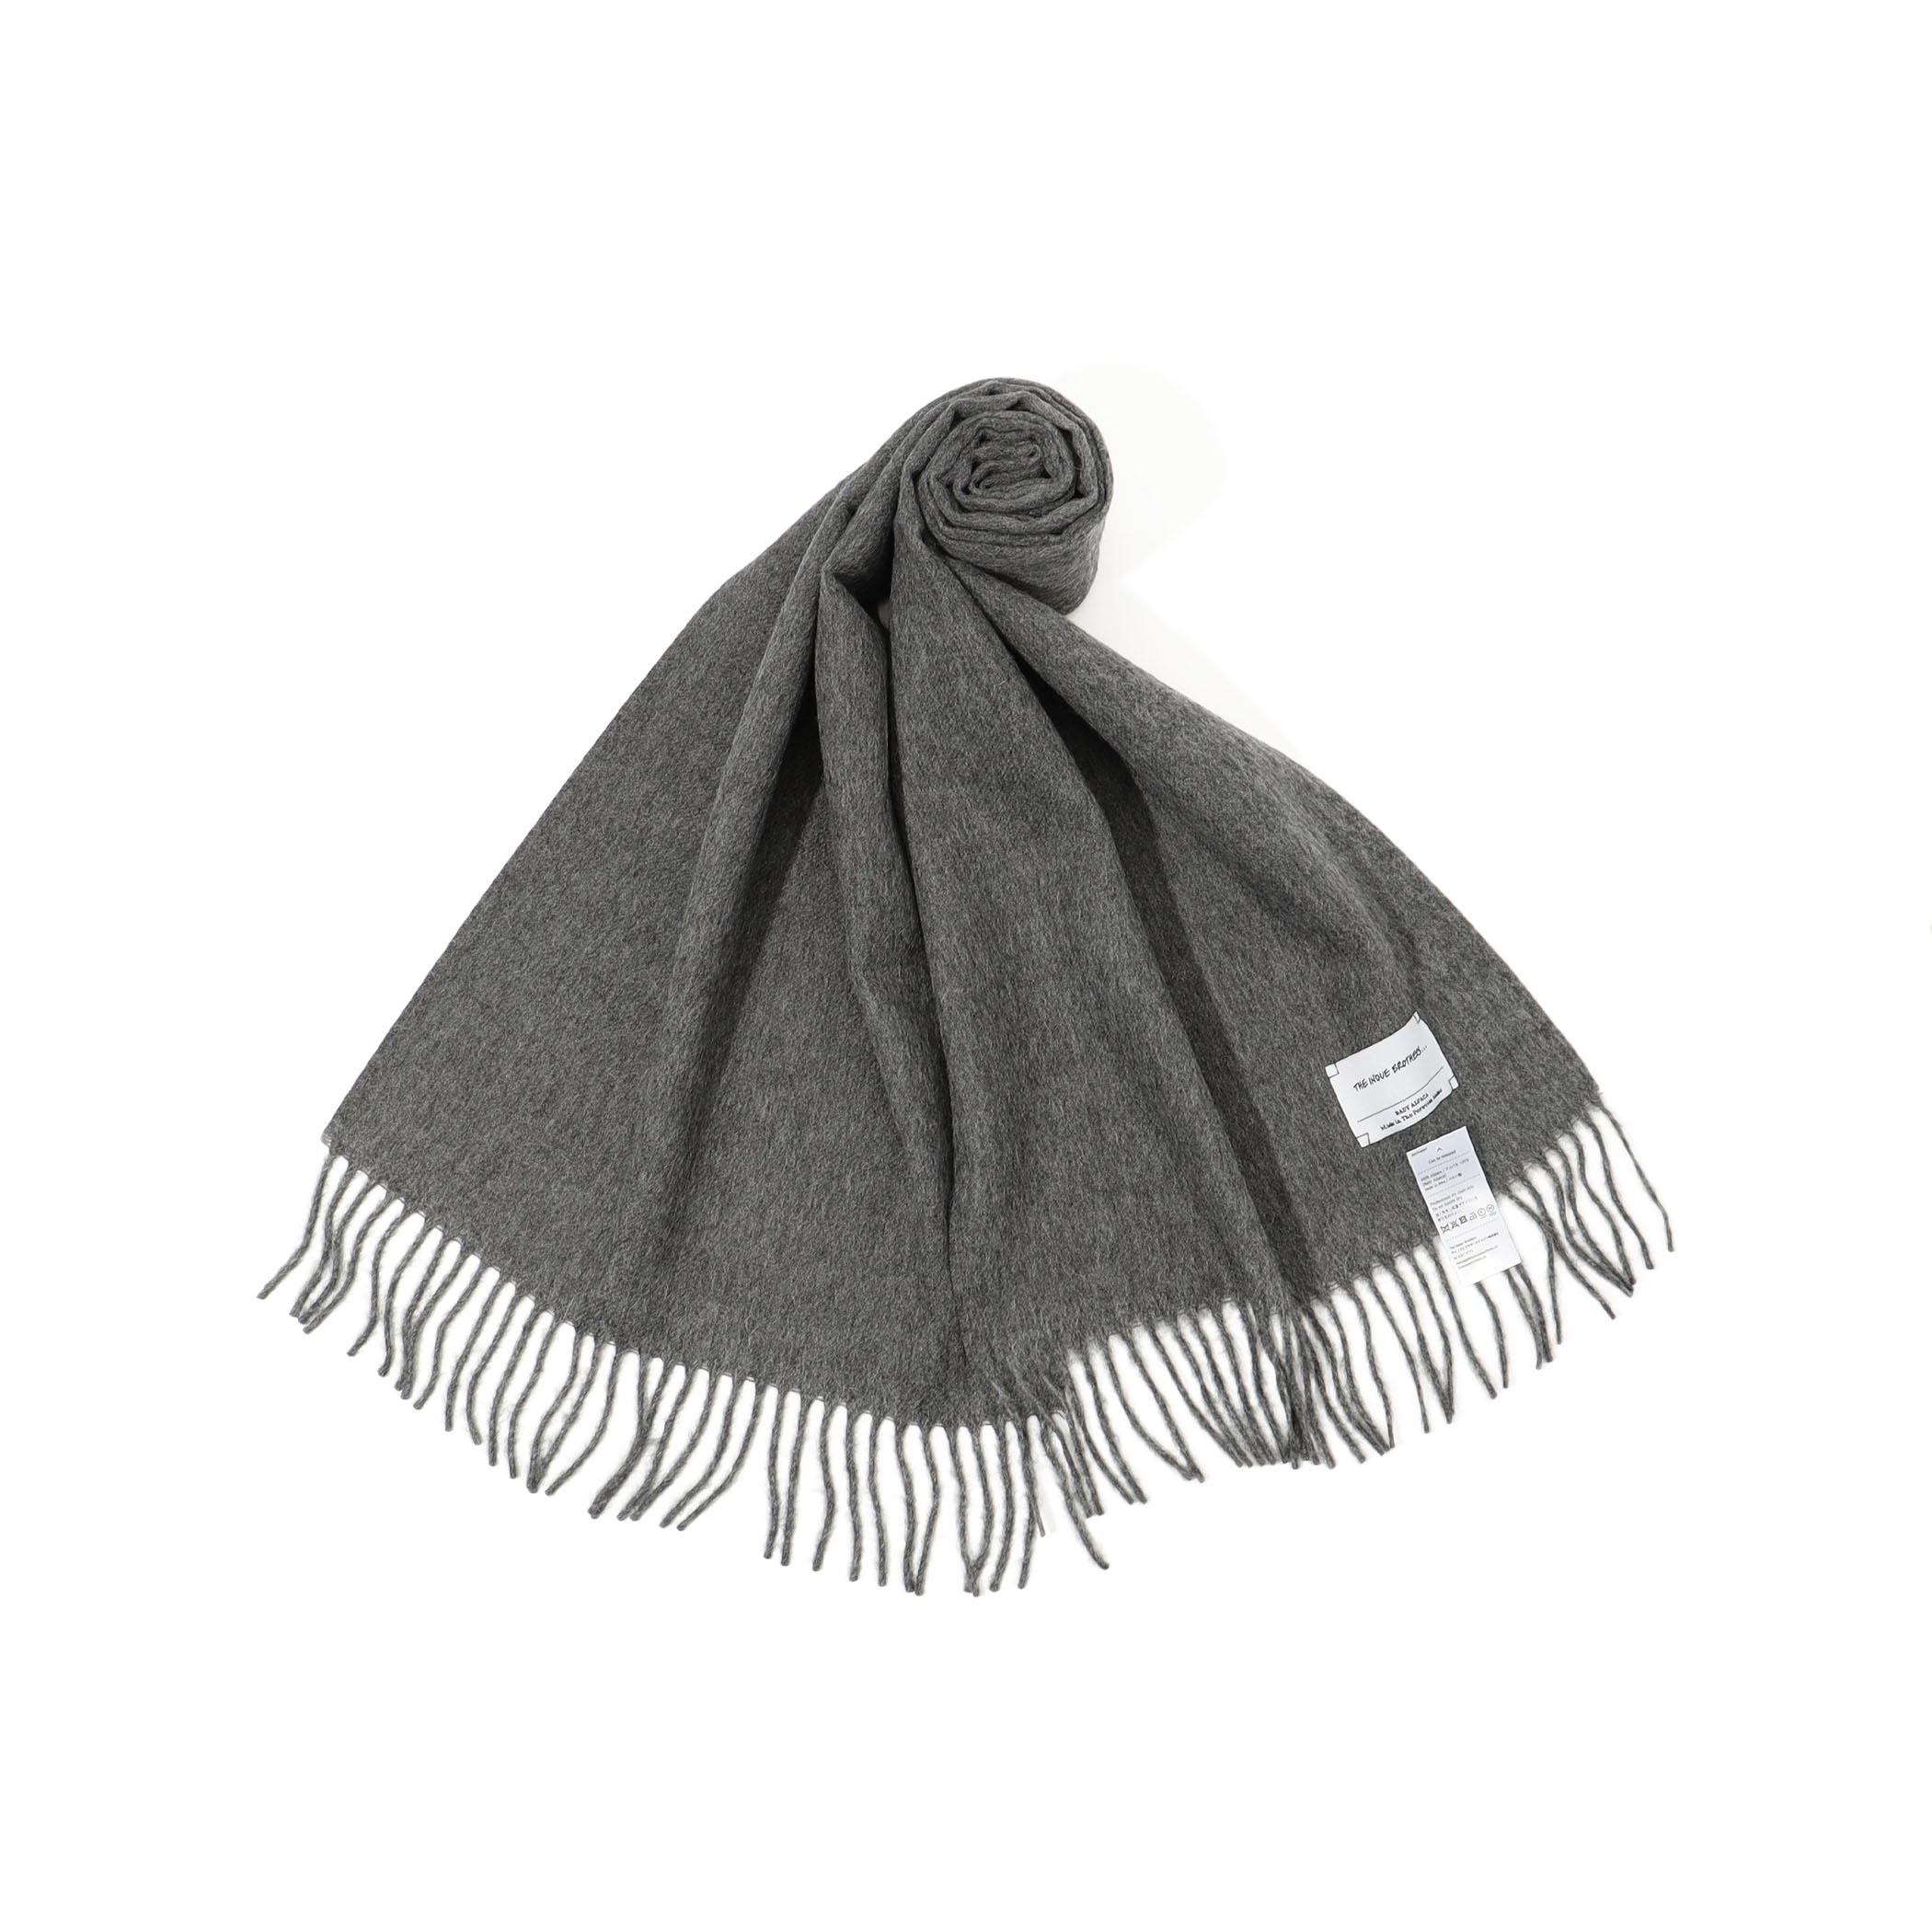 The Inoue Brothers Brushed Scarf